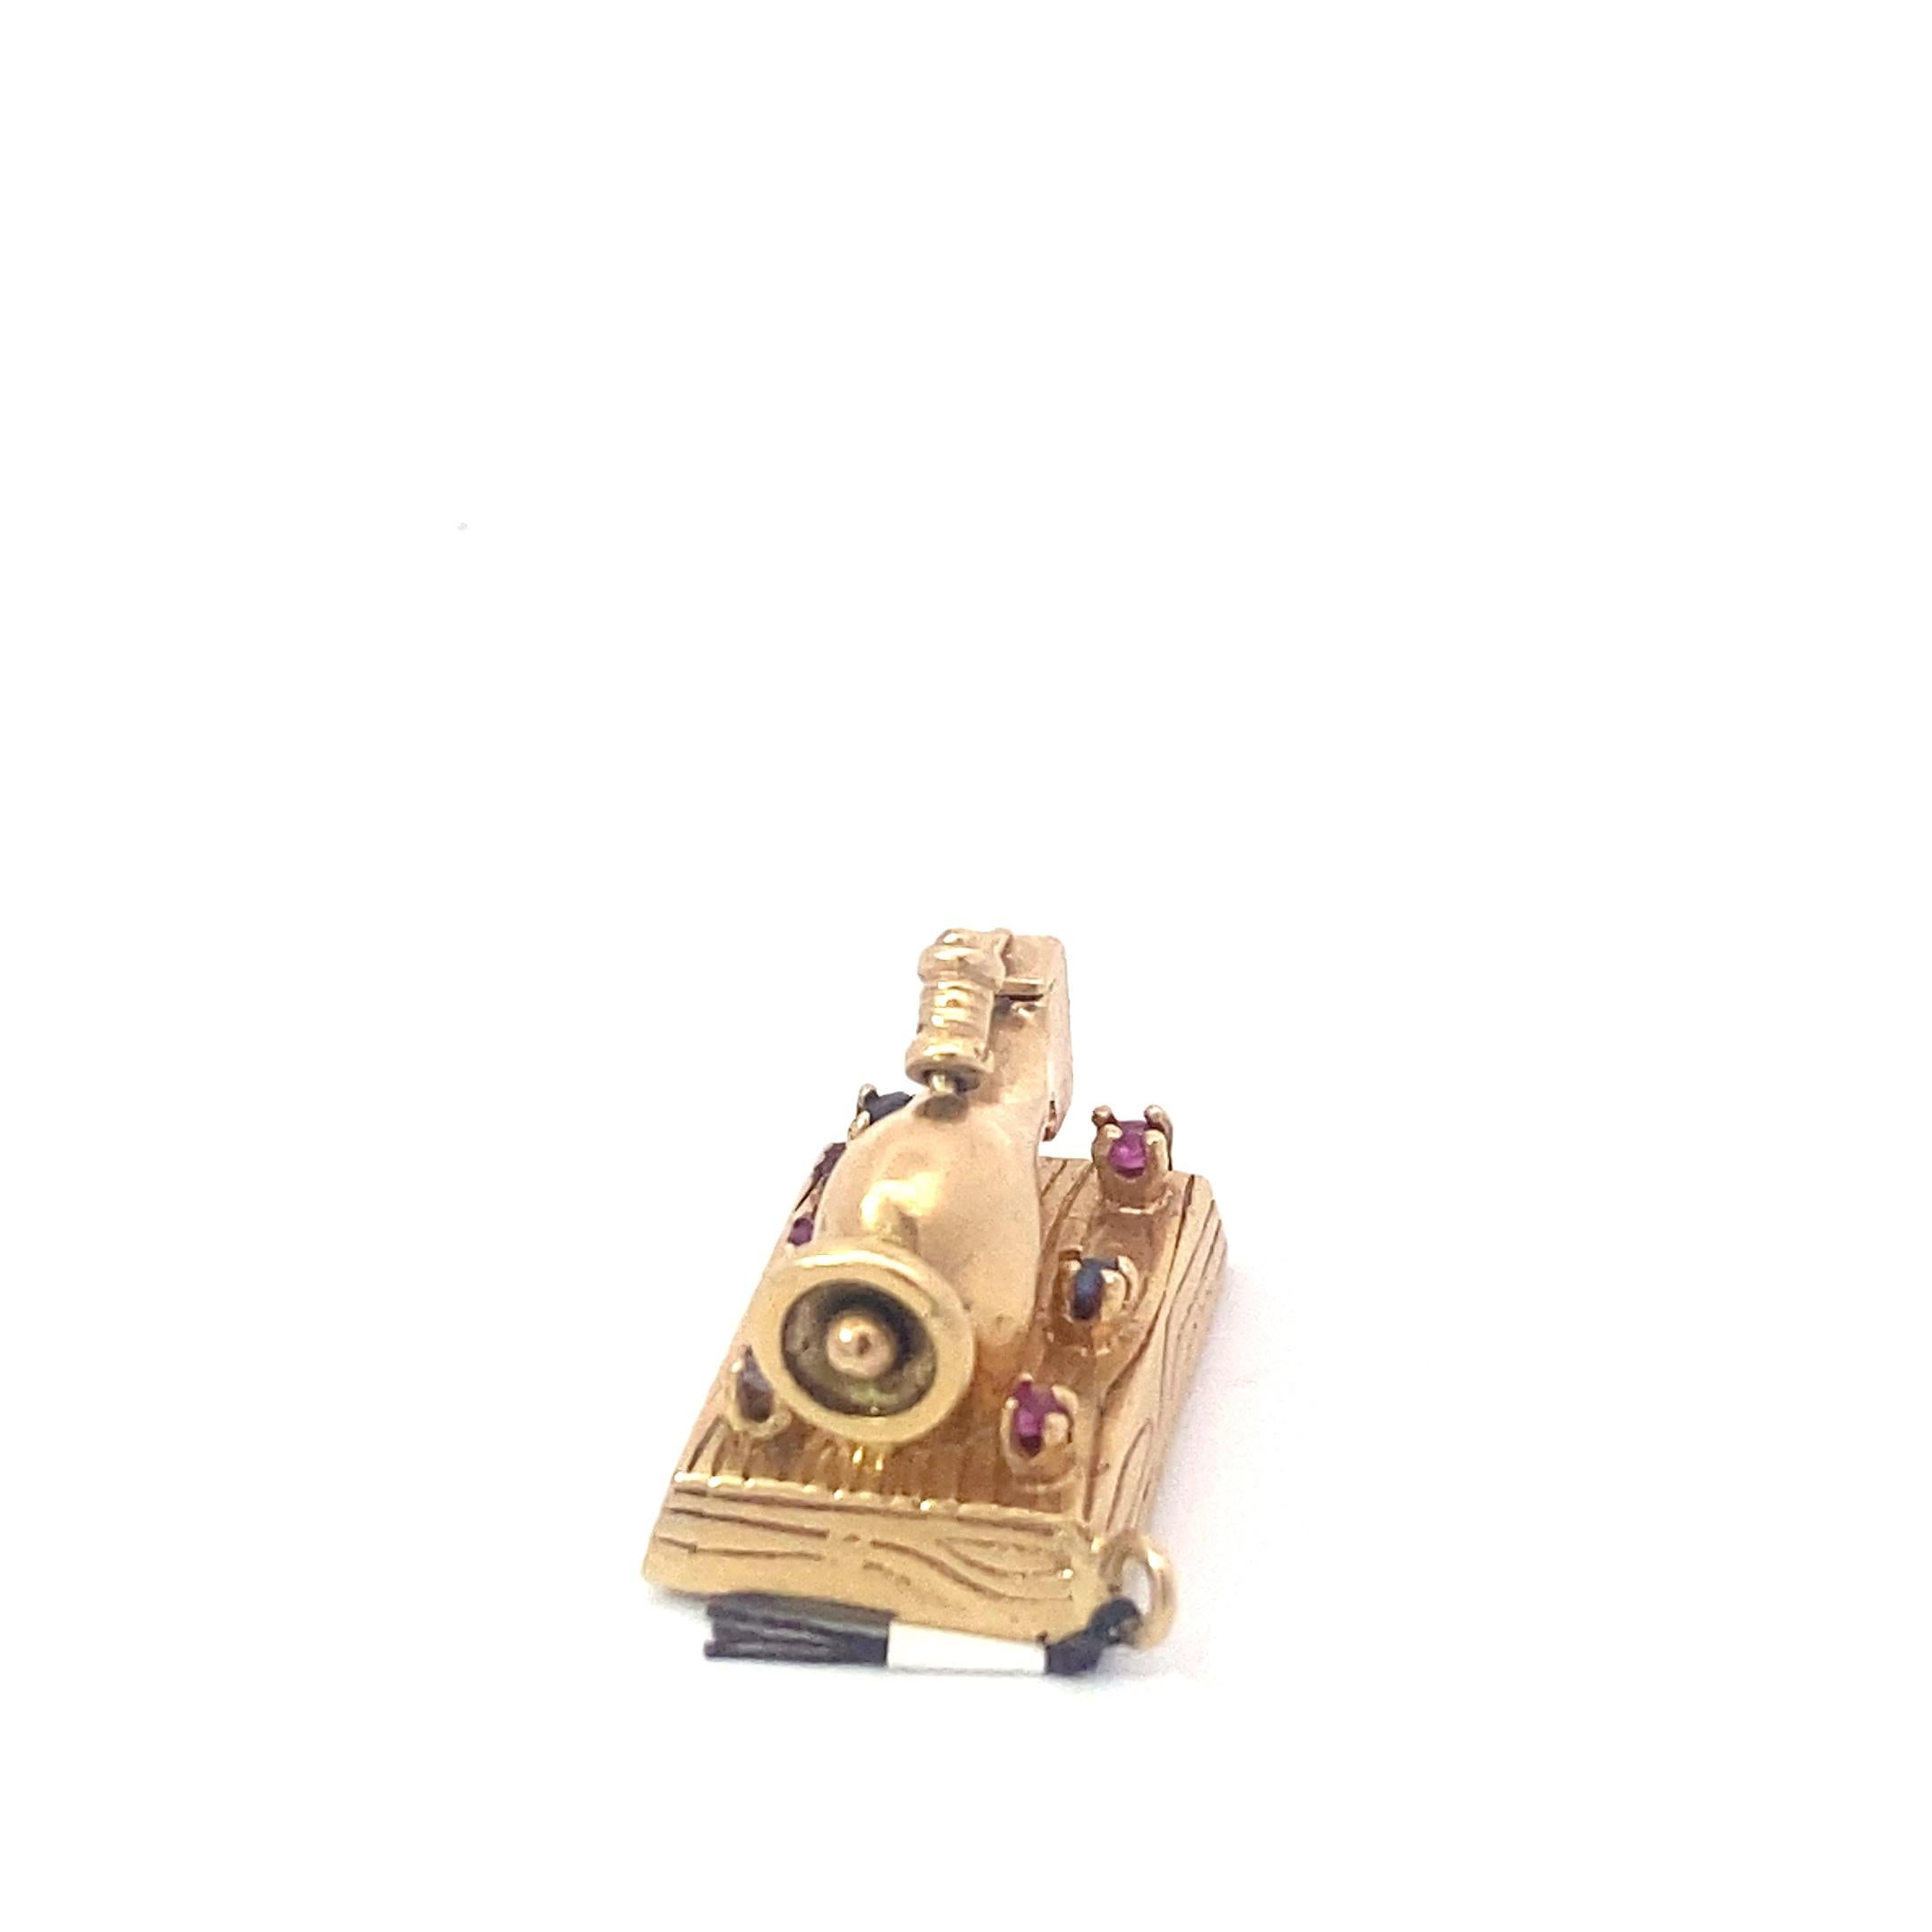 One of a kind vintage charm. This charm is on the larger size, depicting in detail an entire vintage sewing machine with a bobbin of thread. The charm features a ruby and two sapphires set equidistantly across each side of the charm and hangs from a